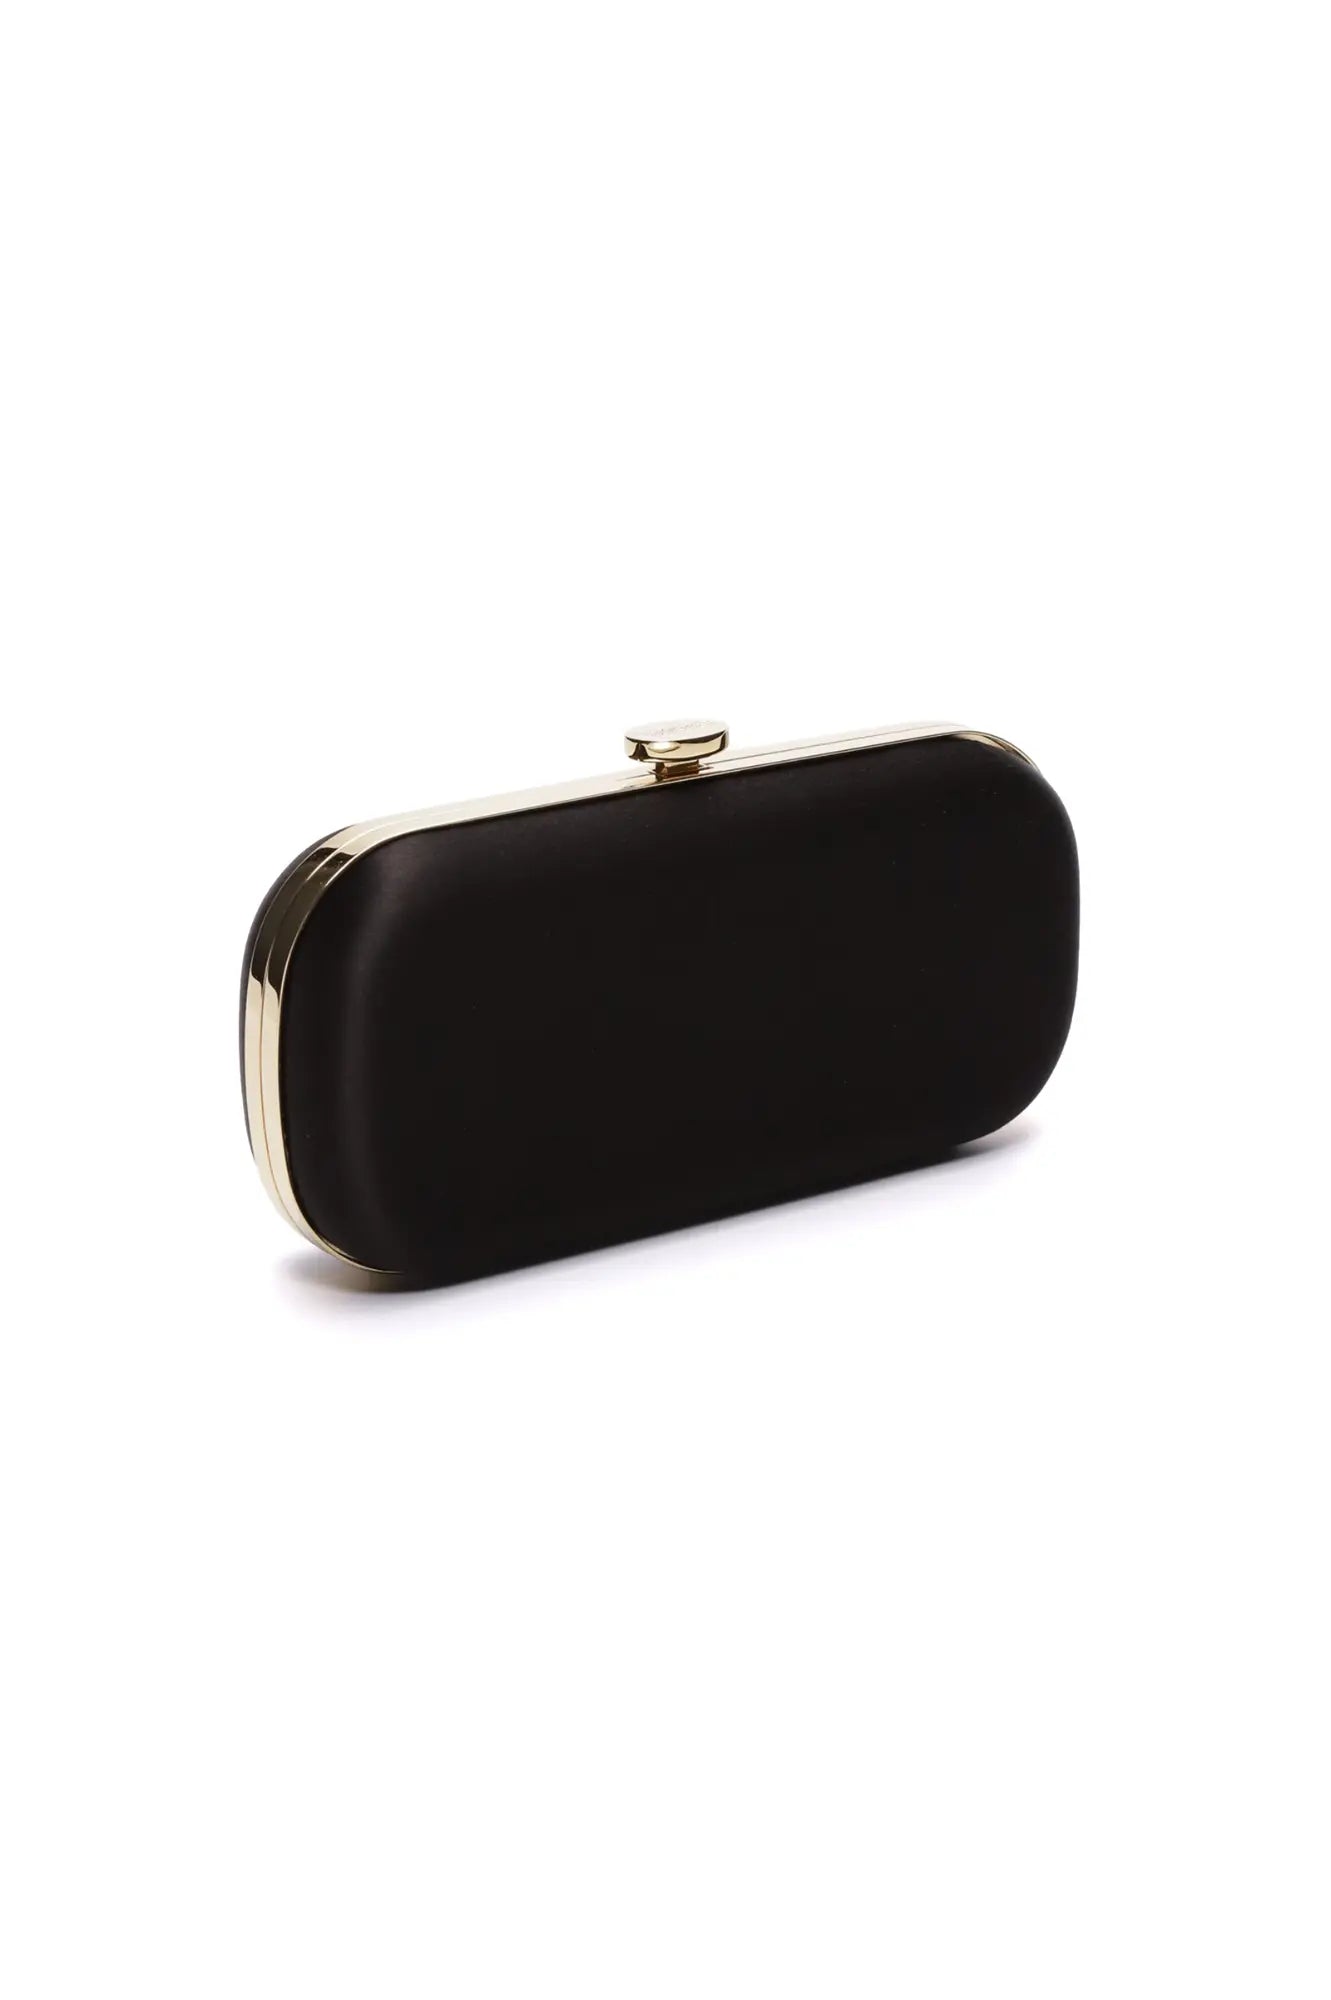 Bella Clutch Black Grande with gold-toned hardware on a white background from The Bella Rosa Collection.